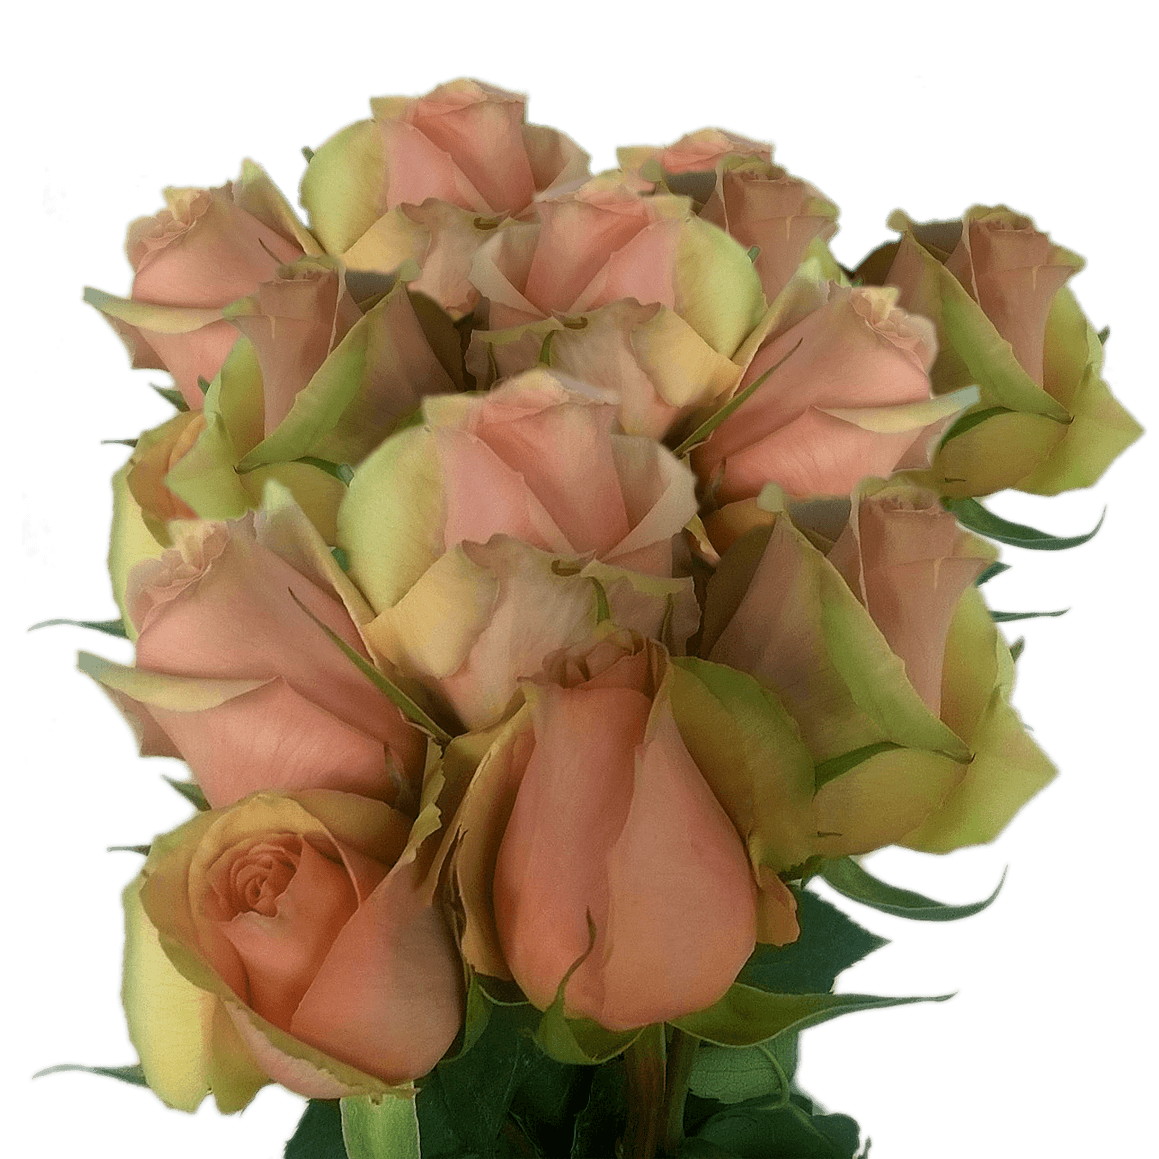 50 Peach Long Stem Roses For Sale Cheap Peach Roses Delivery